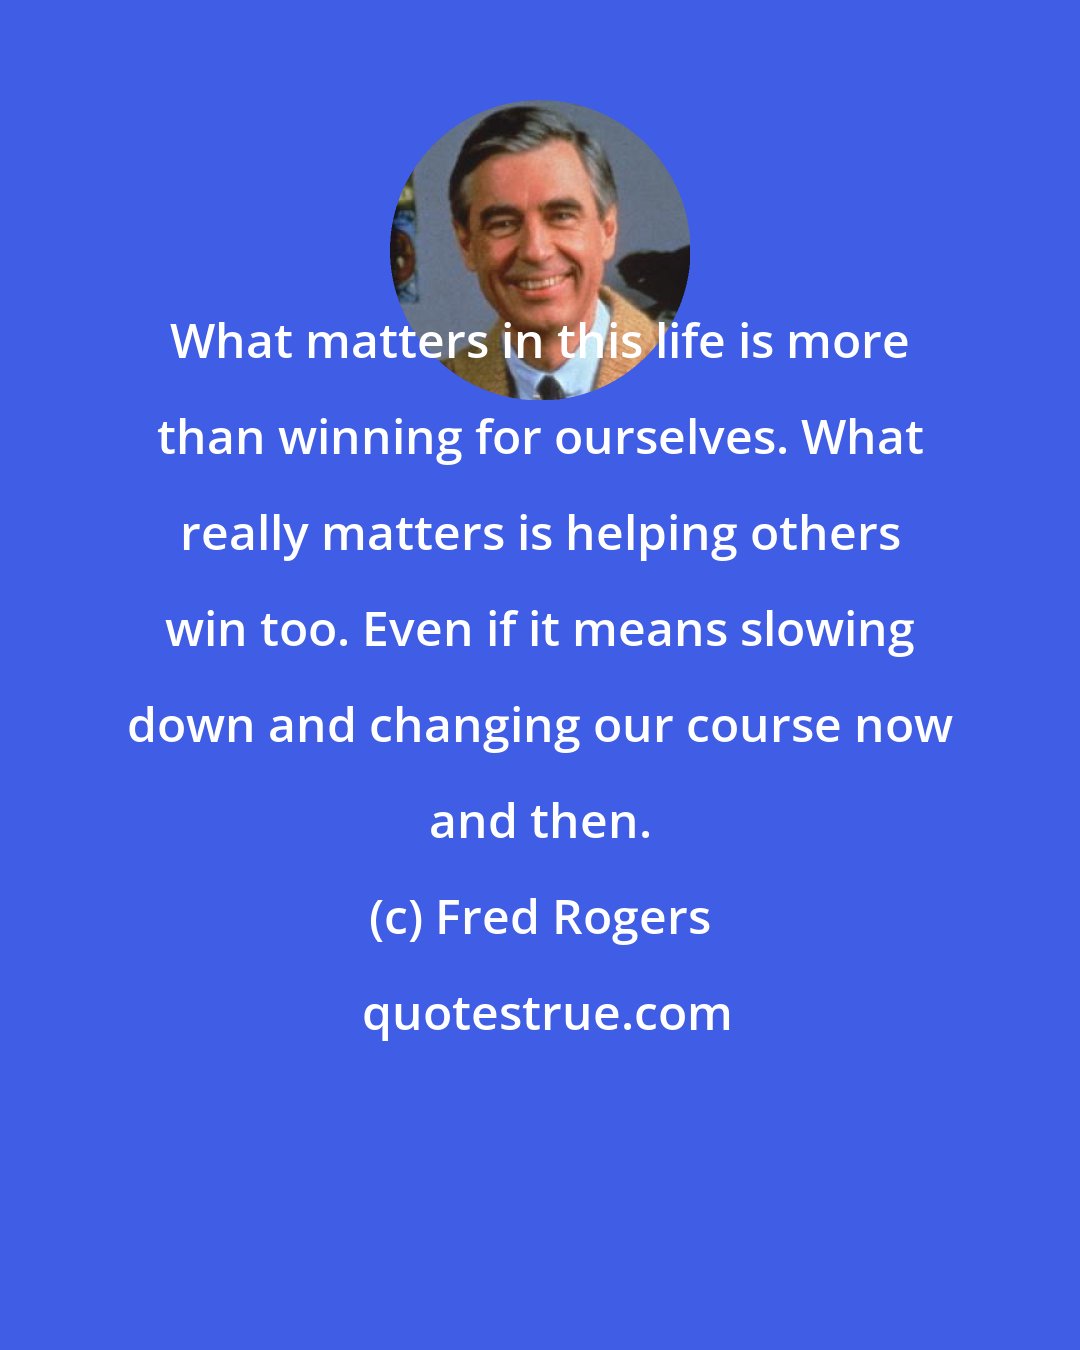 Fred Rogers: What matters in this life is more than winning for ourselves. What really matters is helping others win too. Even if it means slowing down and changing our course now and then.